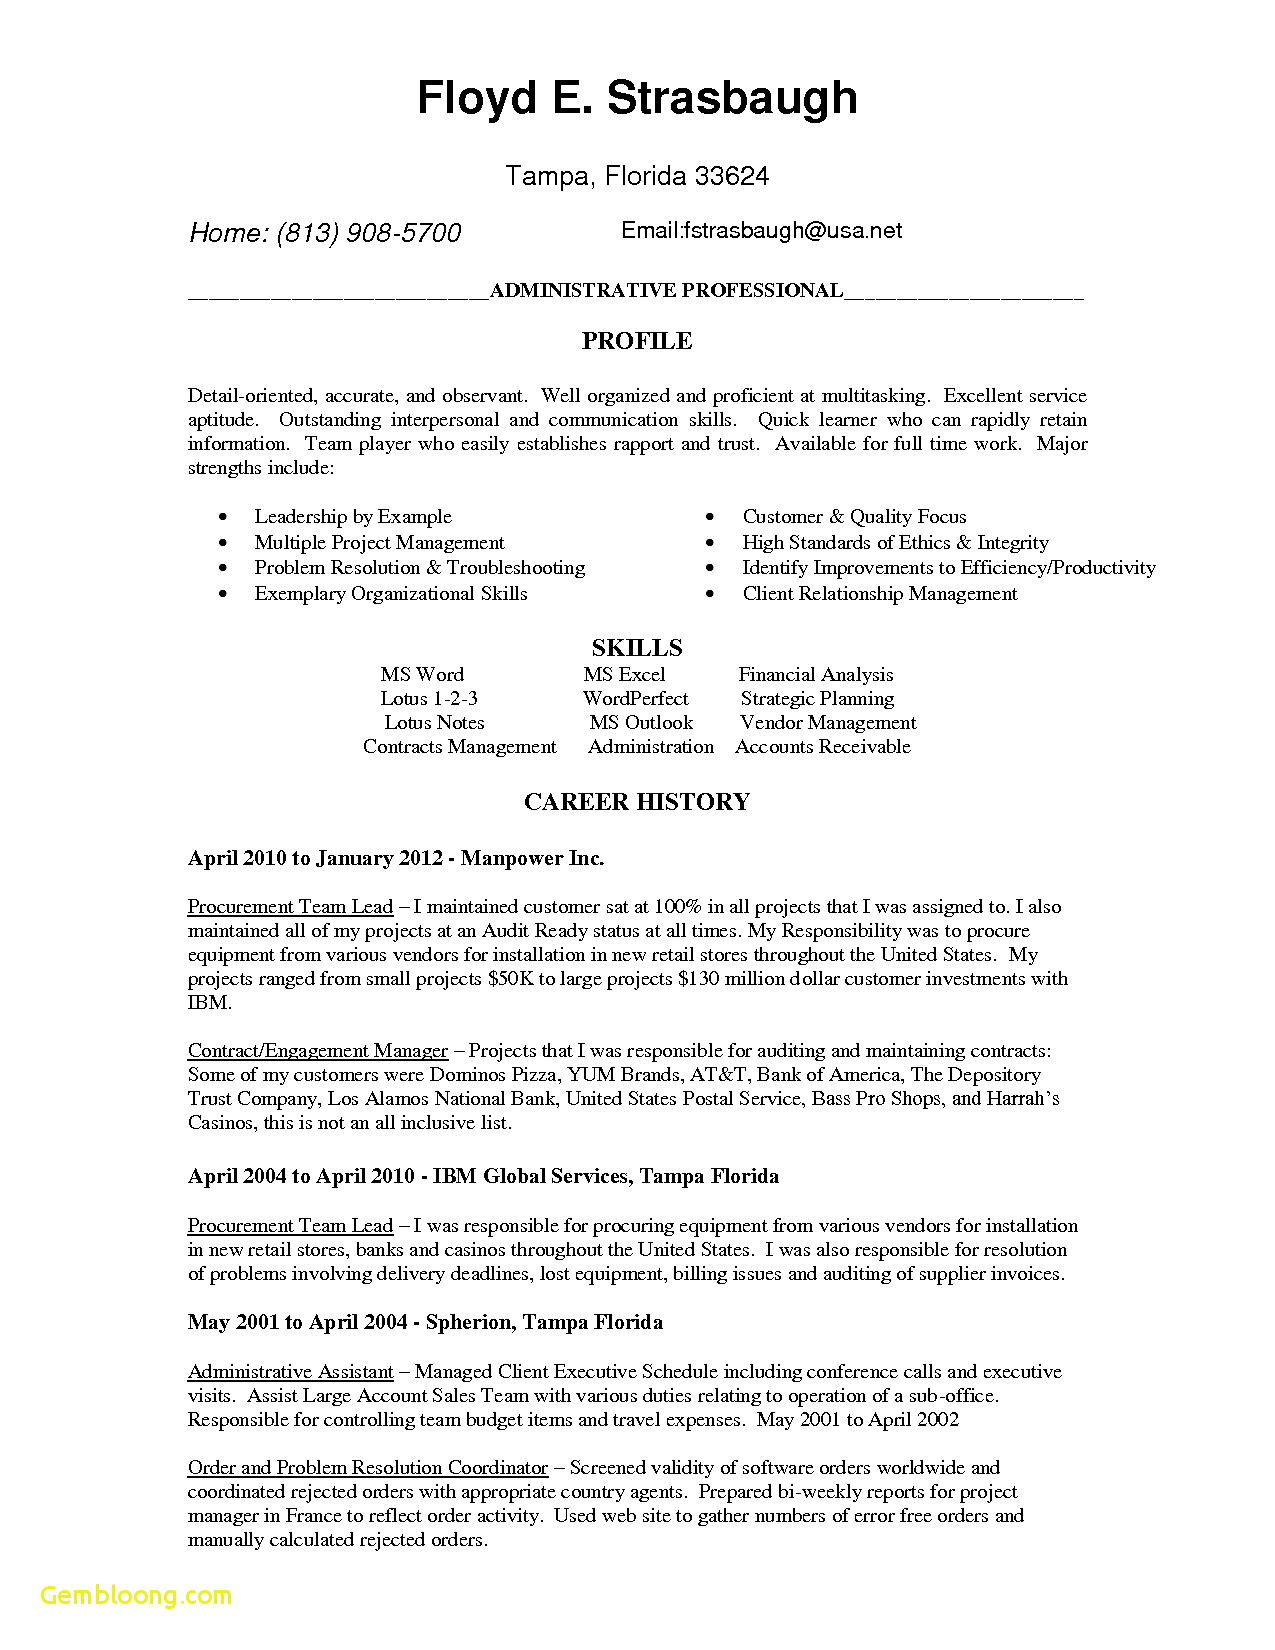 executive cover letter template word Collection-Babysitting Resume Templates New Executive Resume Templates Word Od Specialist Cover Letter Lead 19-j